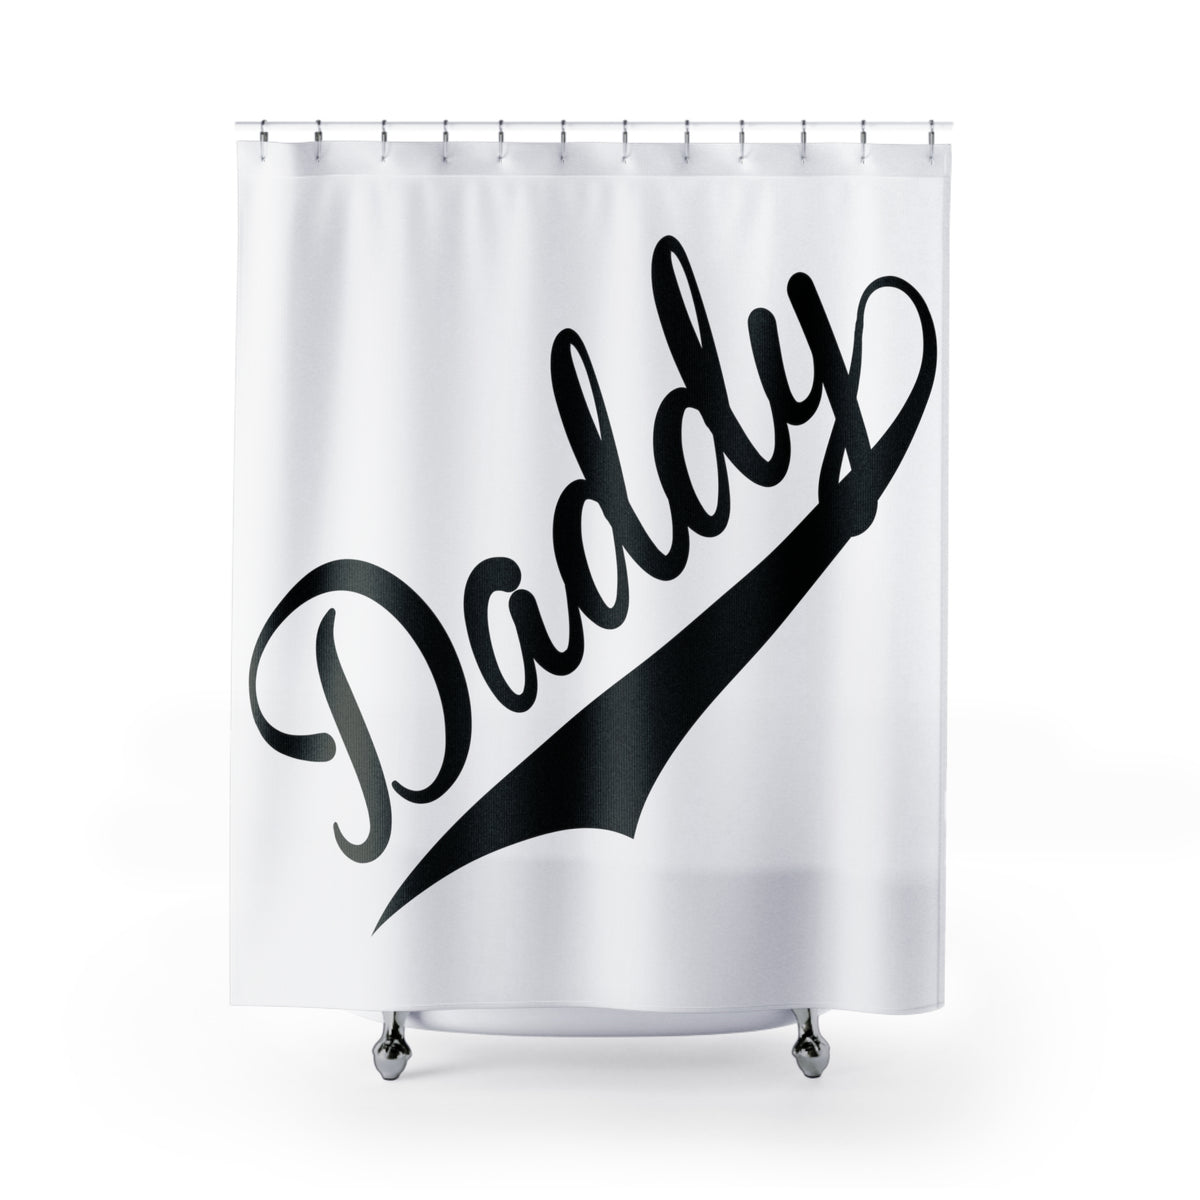 Daddy Shower Curtain - Shower Curtain - Twisted Jezebel